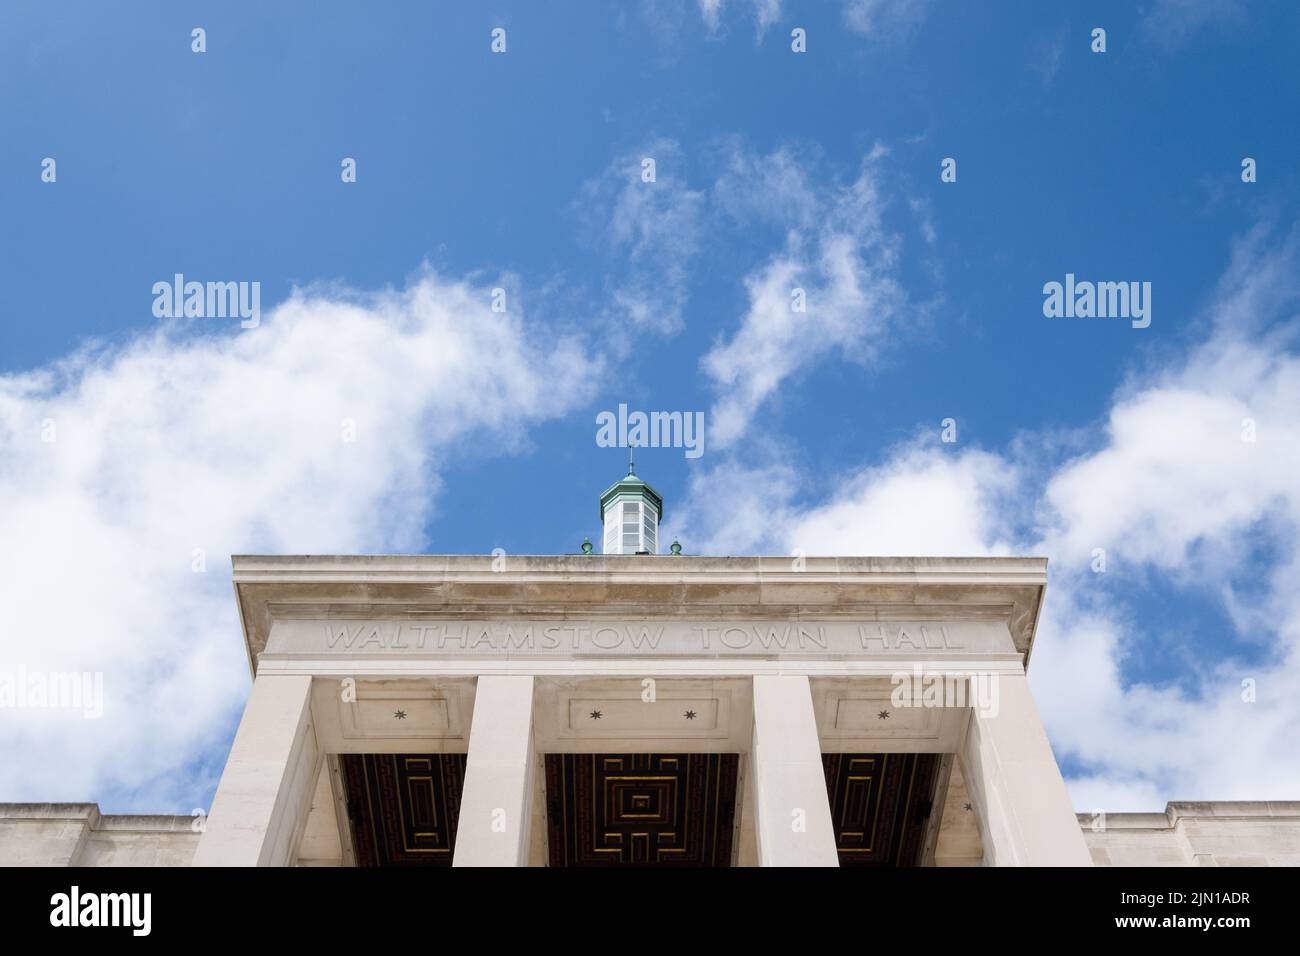 Waltham Forest Town Hall, formerly Walthamstow Town Hall, London. Stock Photo